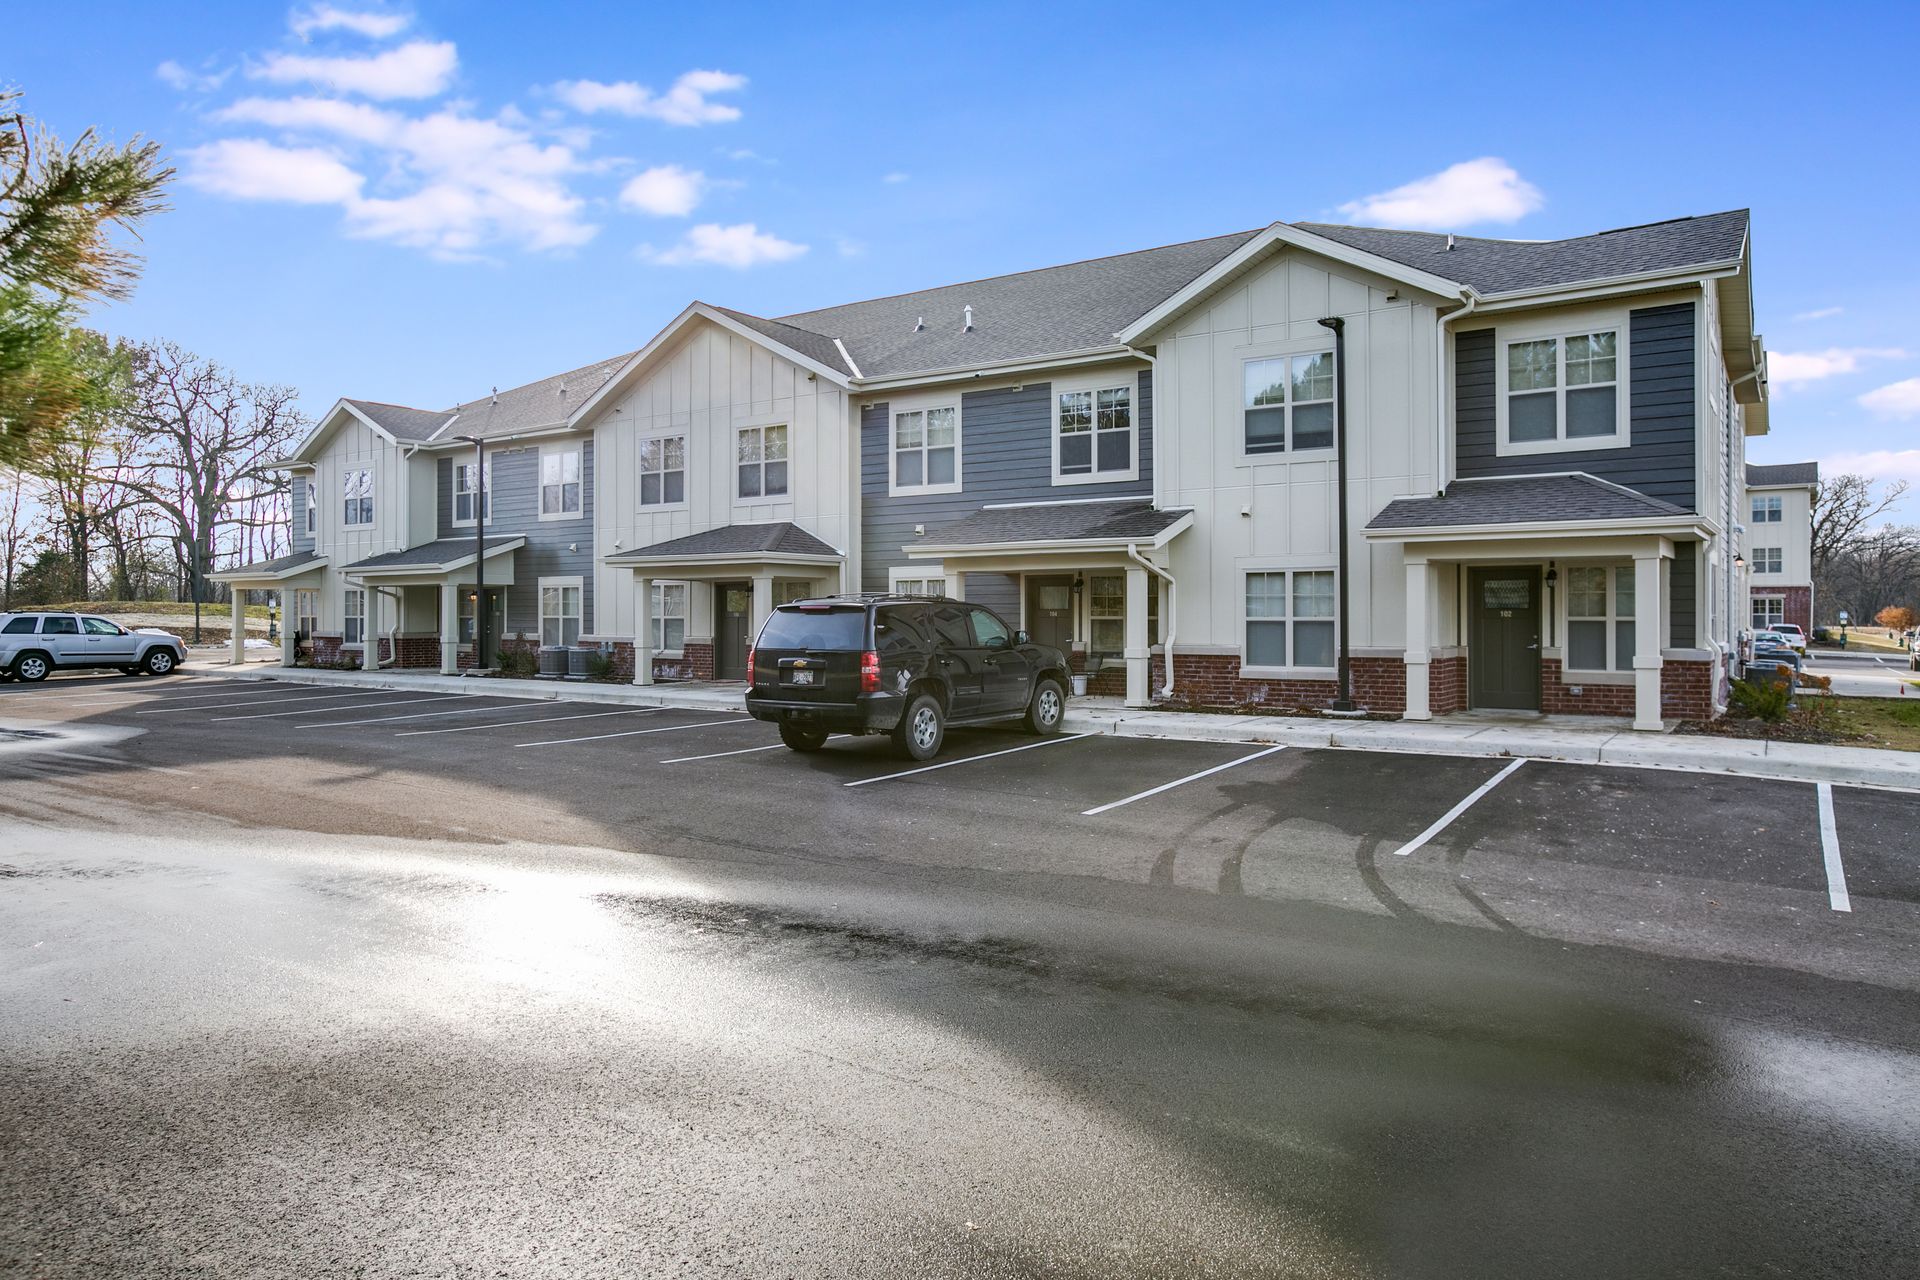 Whitetail Ridge has affordable apartments in Salem, WI